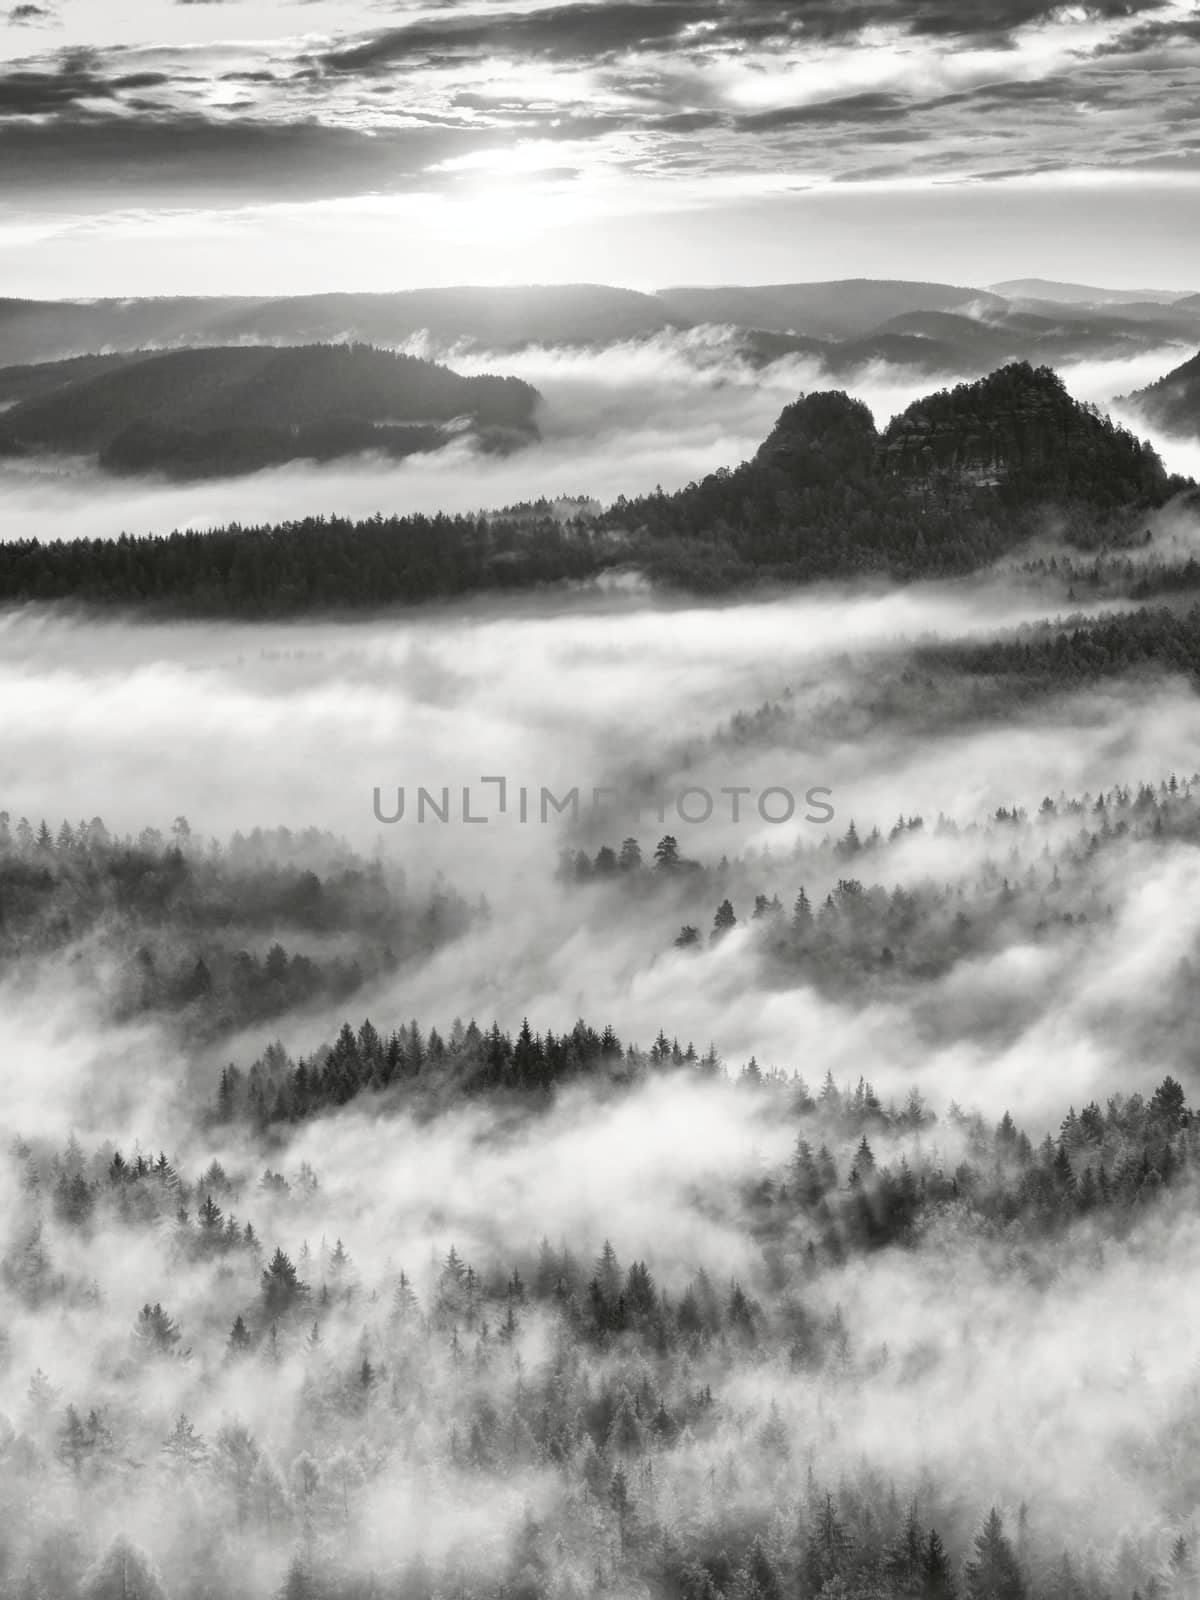 Black and white photo. Misty daybreak in a beautiful hills. Peaks of hills are sticking out from foggy background.